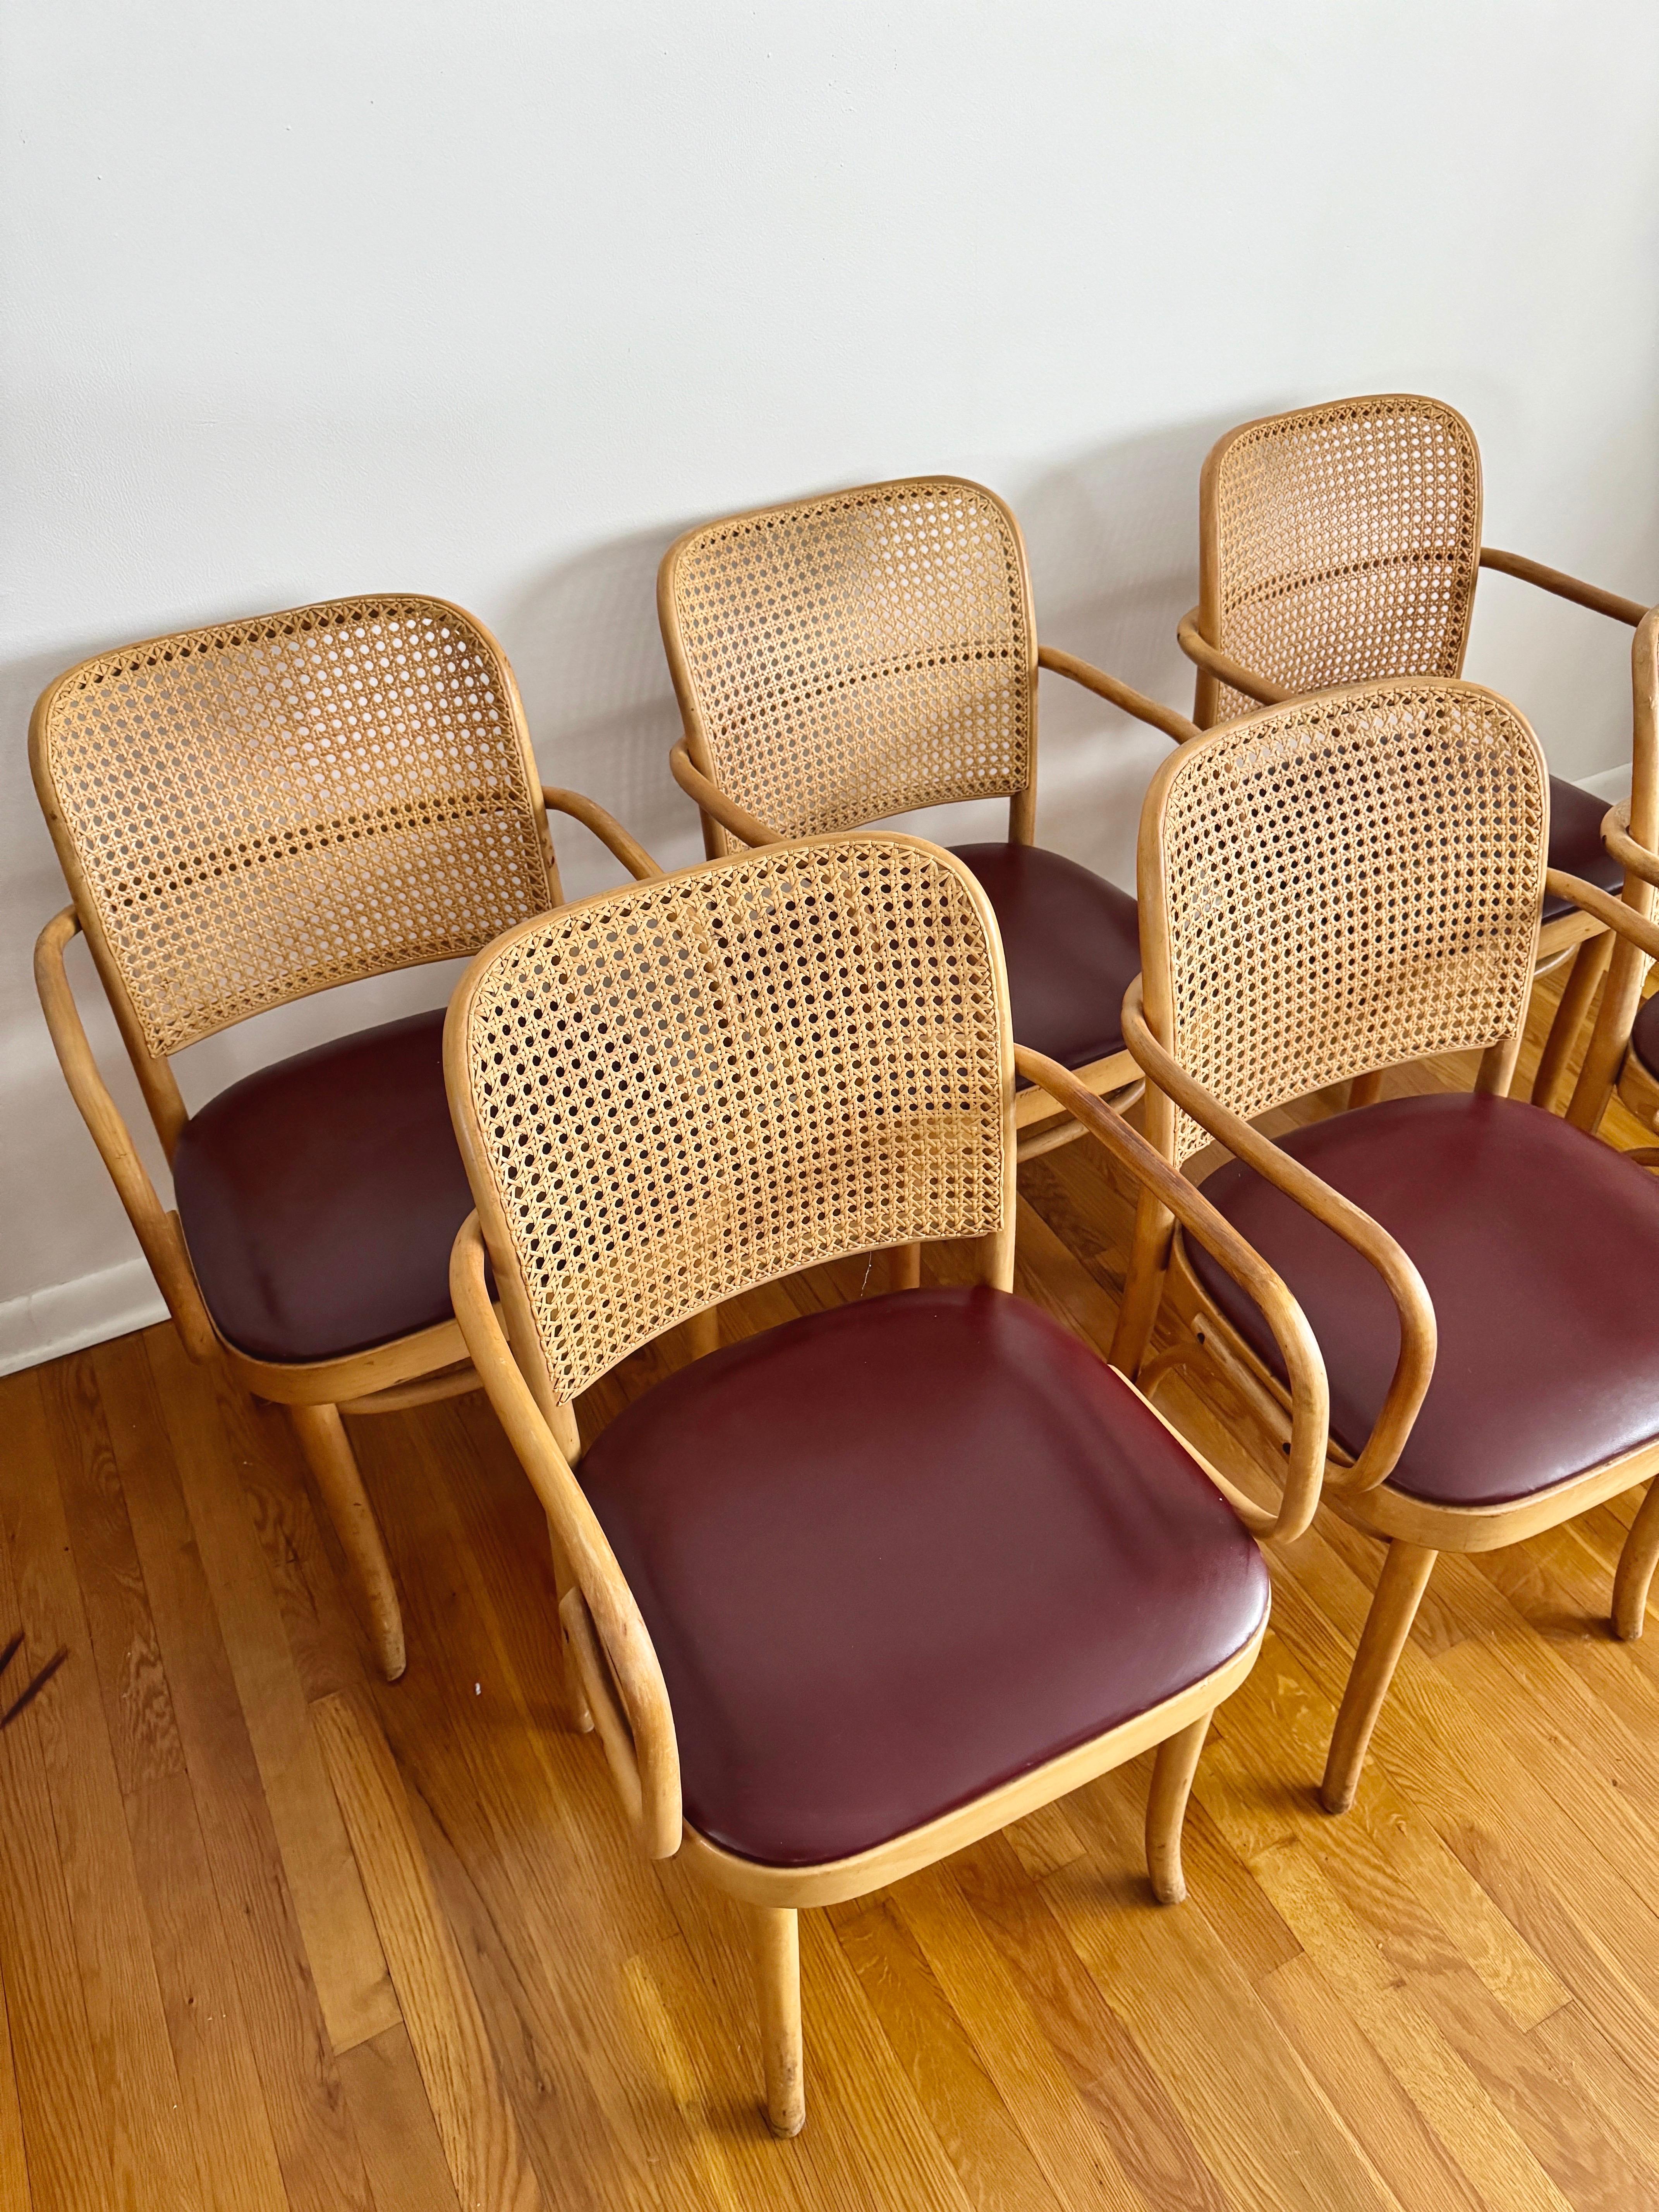 Rustic Mid Century Thonet Style Bentwood Chairs Chairs - Set of 6